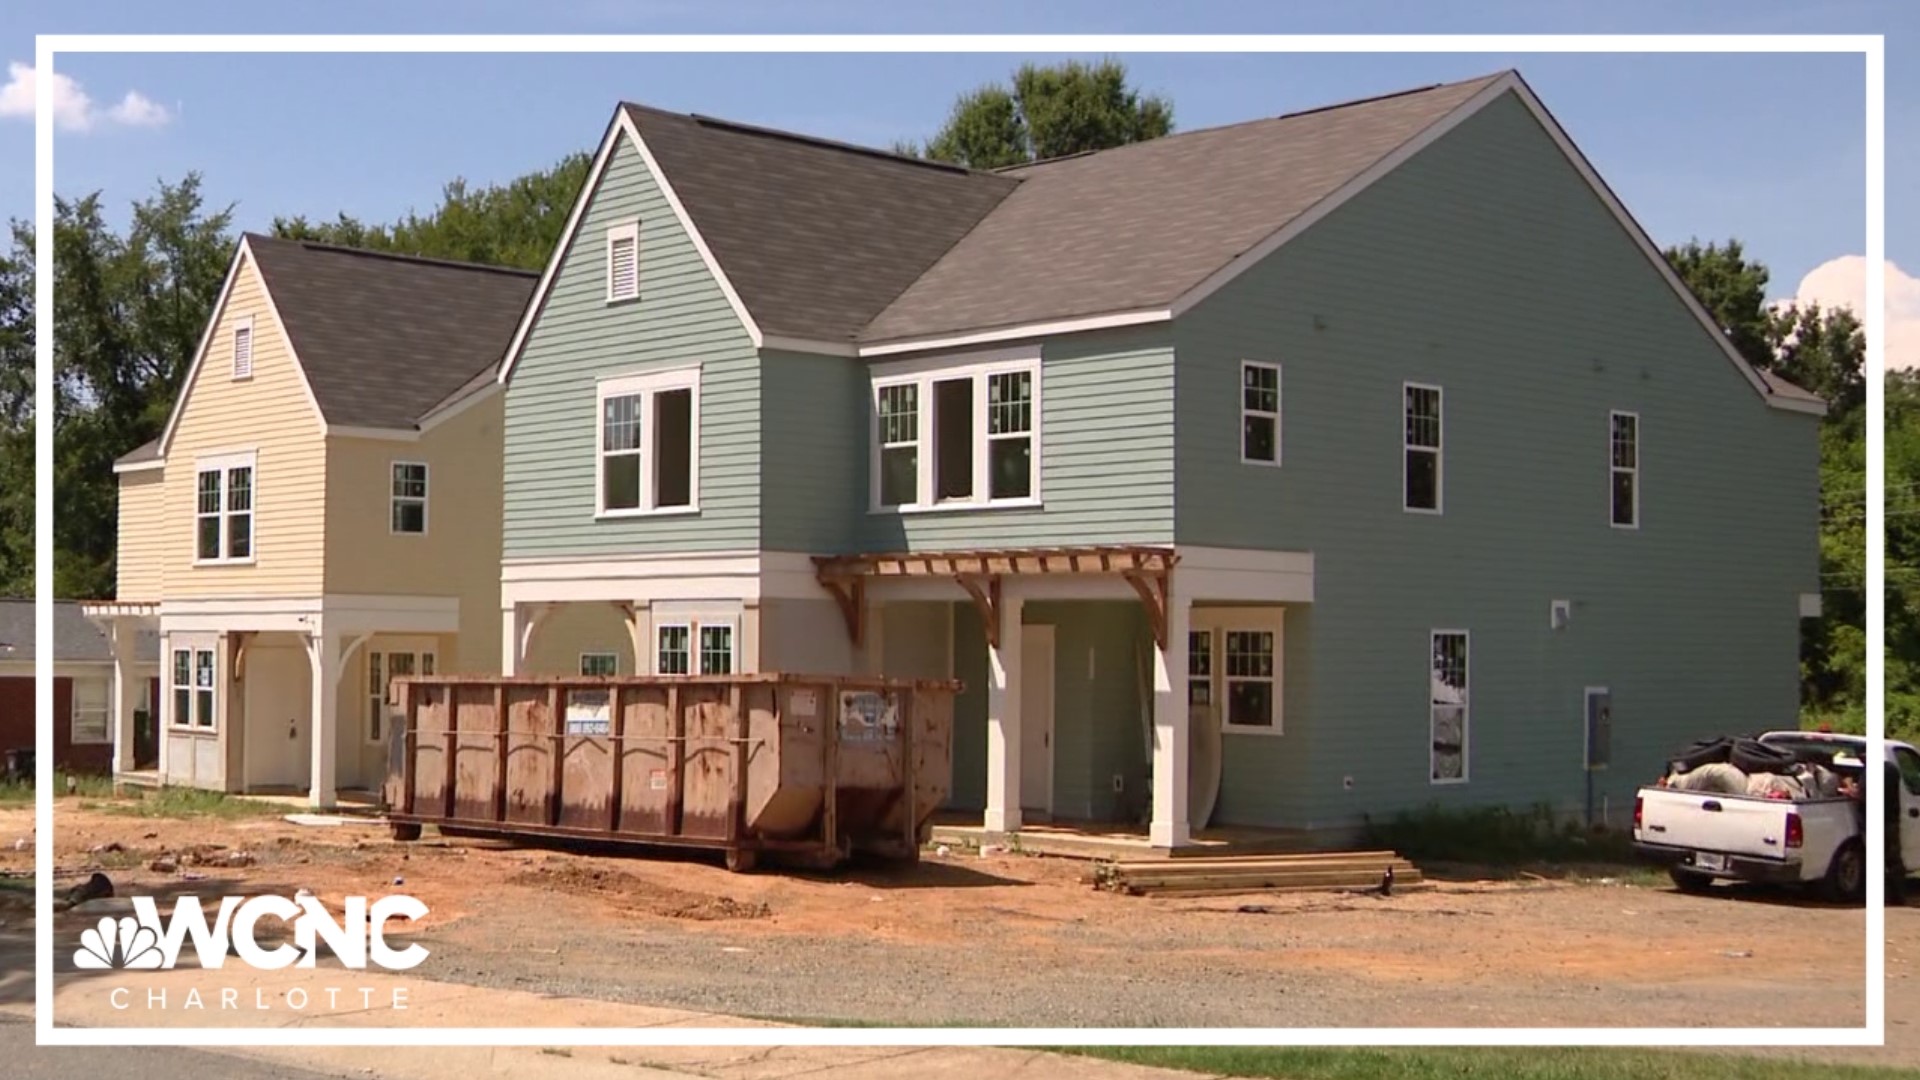 Finding affordable housing in the Charlotte area has become a challenge.